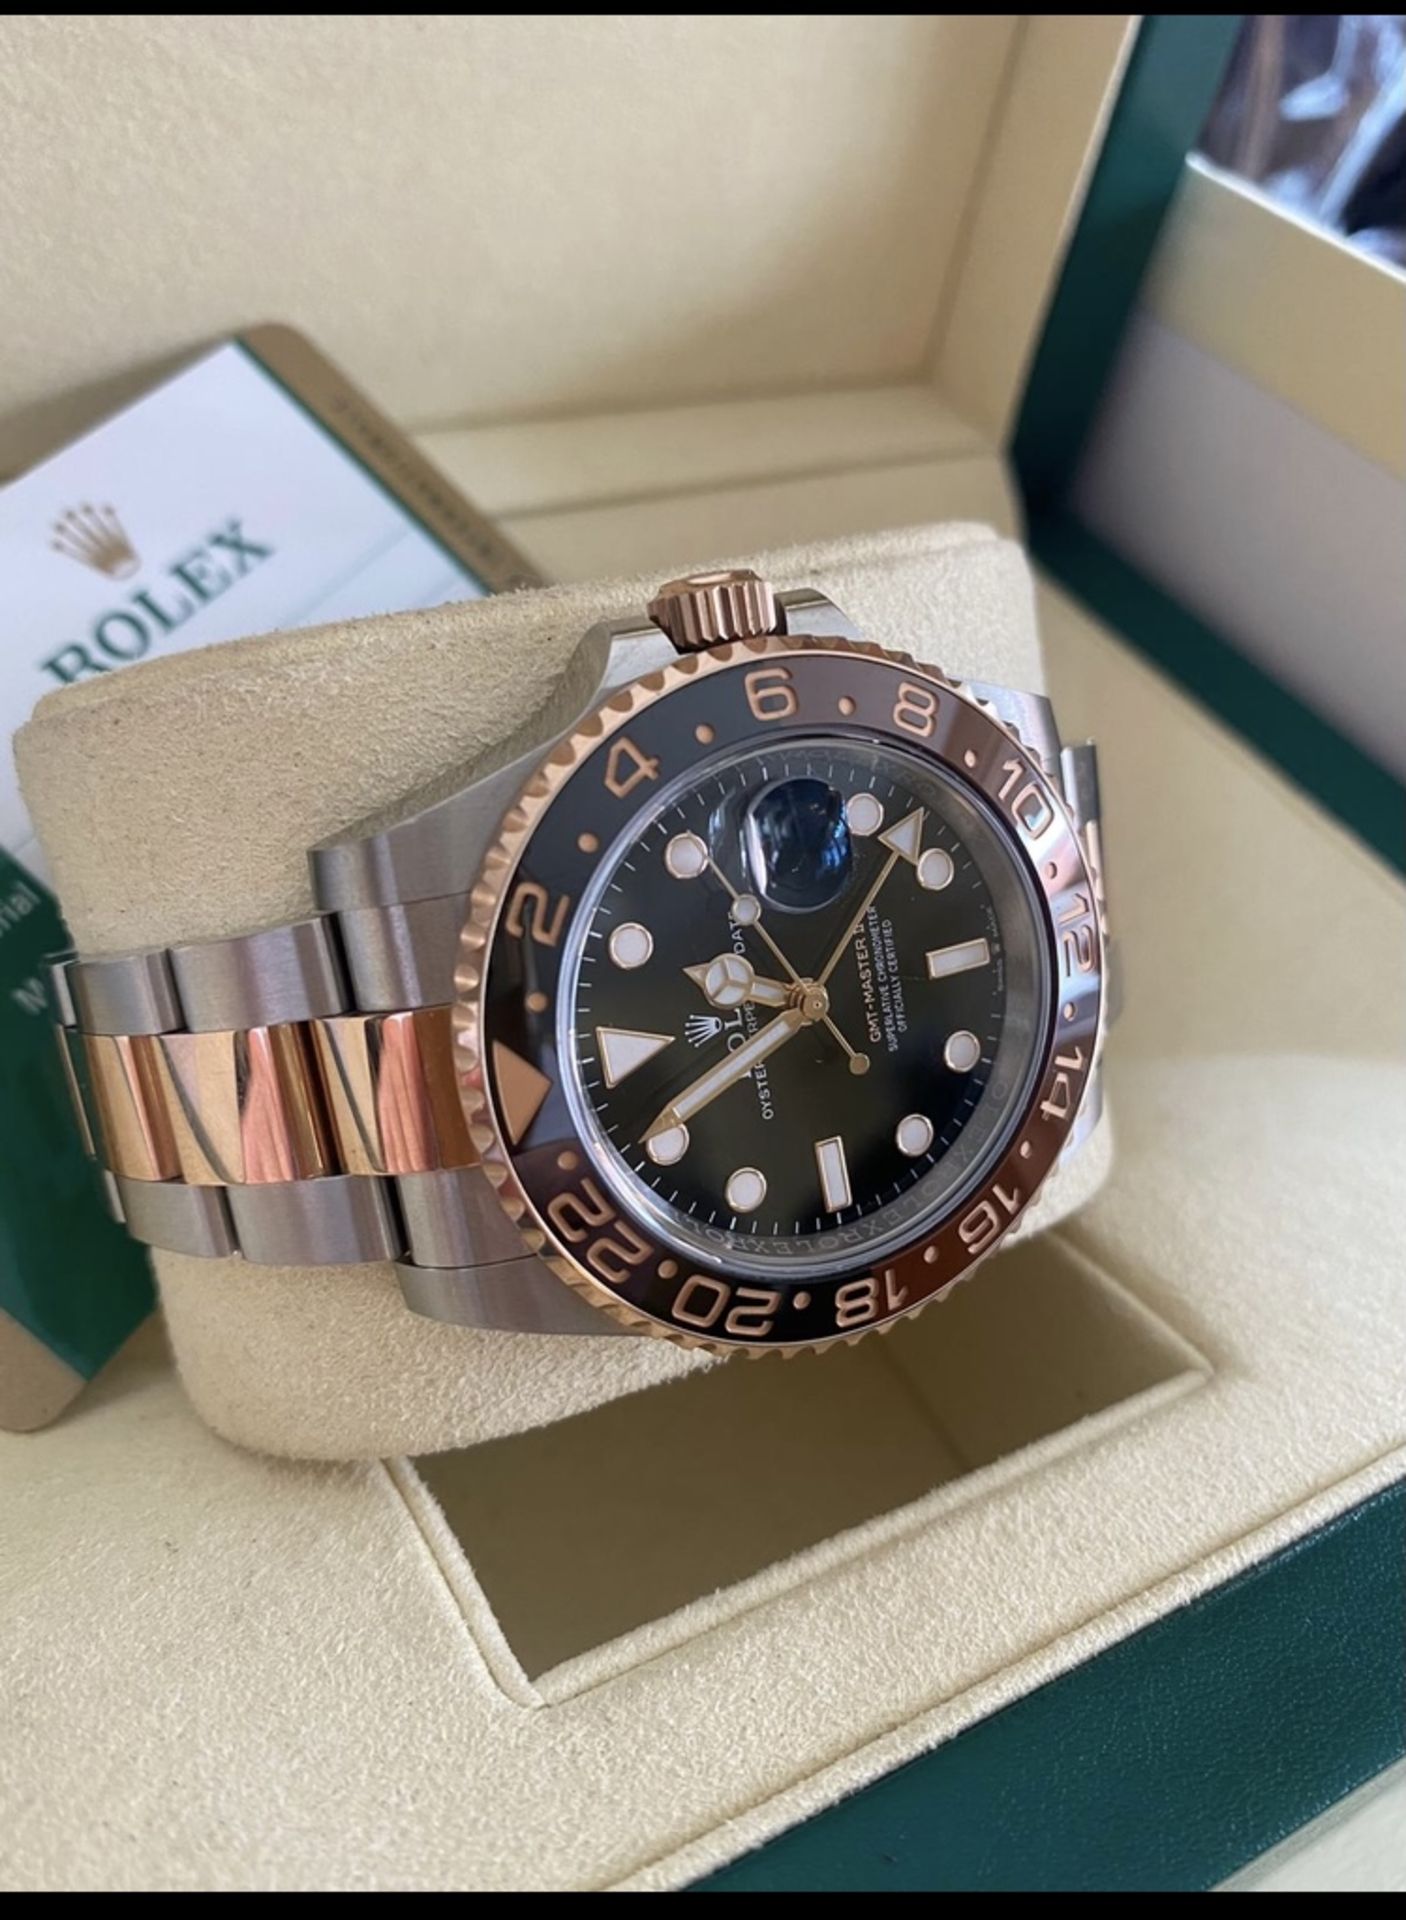 2019 ROLEX GMT MASTER 11 ROOT BEER WATCH LOCATION NORTH YORKSHIRE. - Image 2 of 6